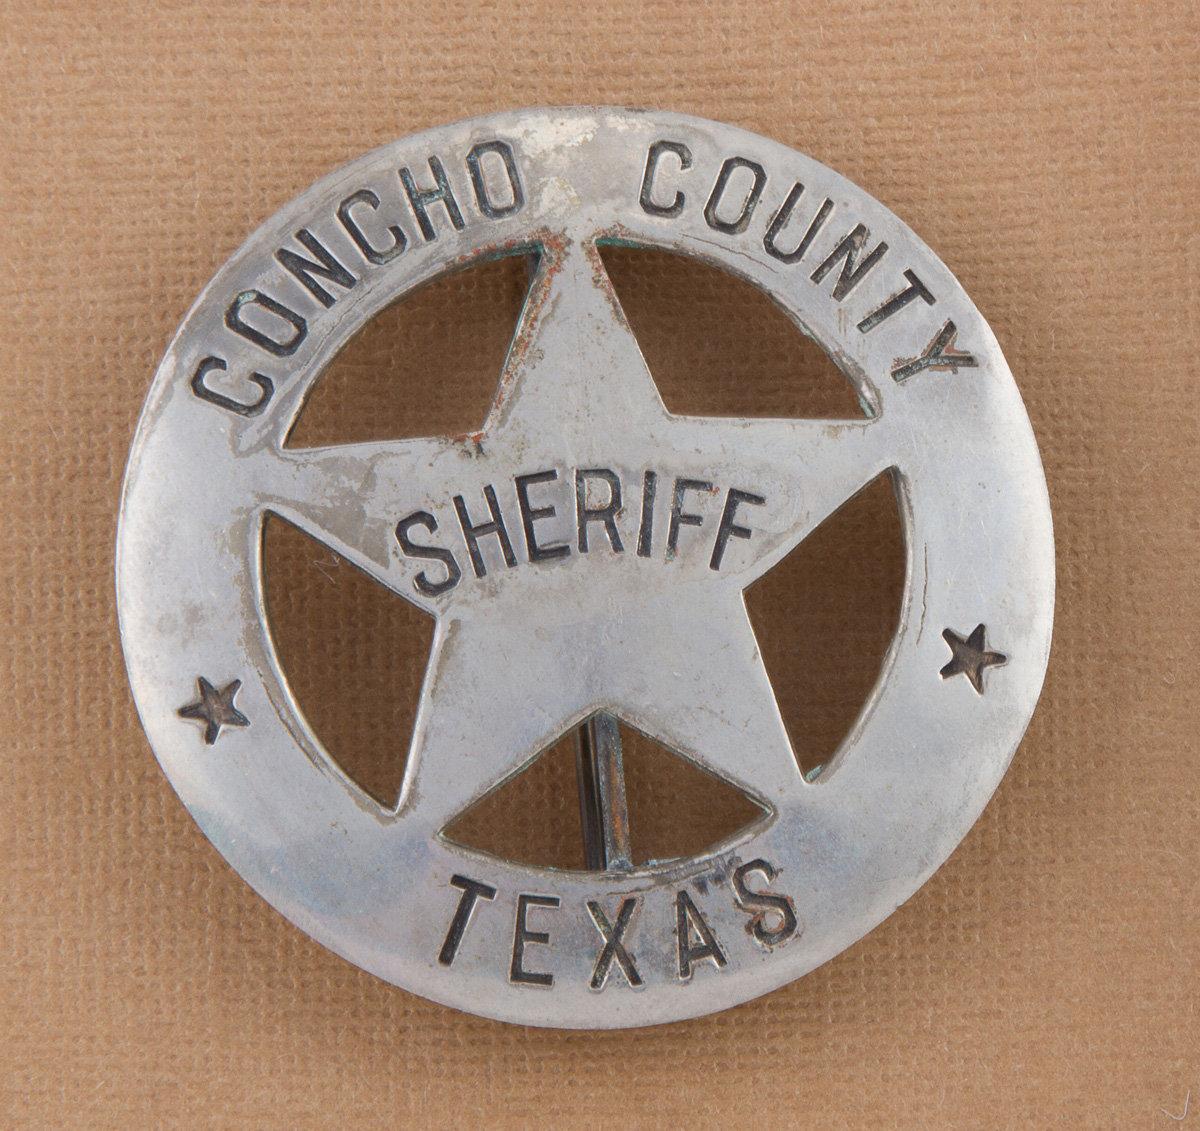 Circle star Badge, "SHERIFF, CONCHO COUNTY, TEXAS",  2 3/4" across, showing nice even wear.  George